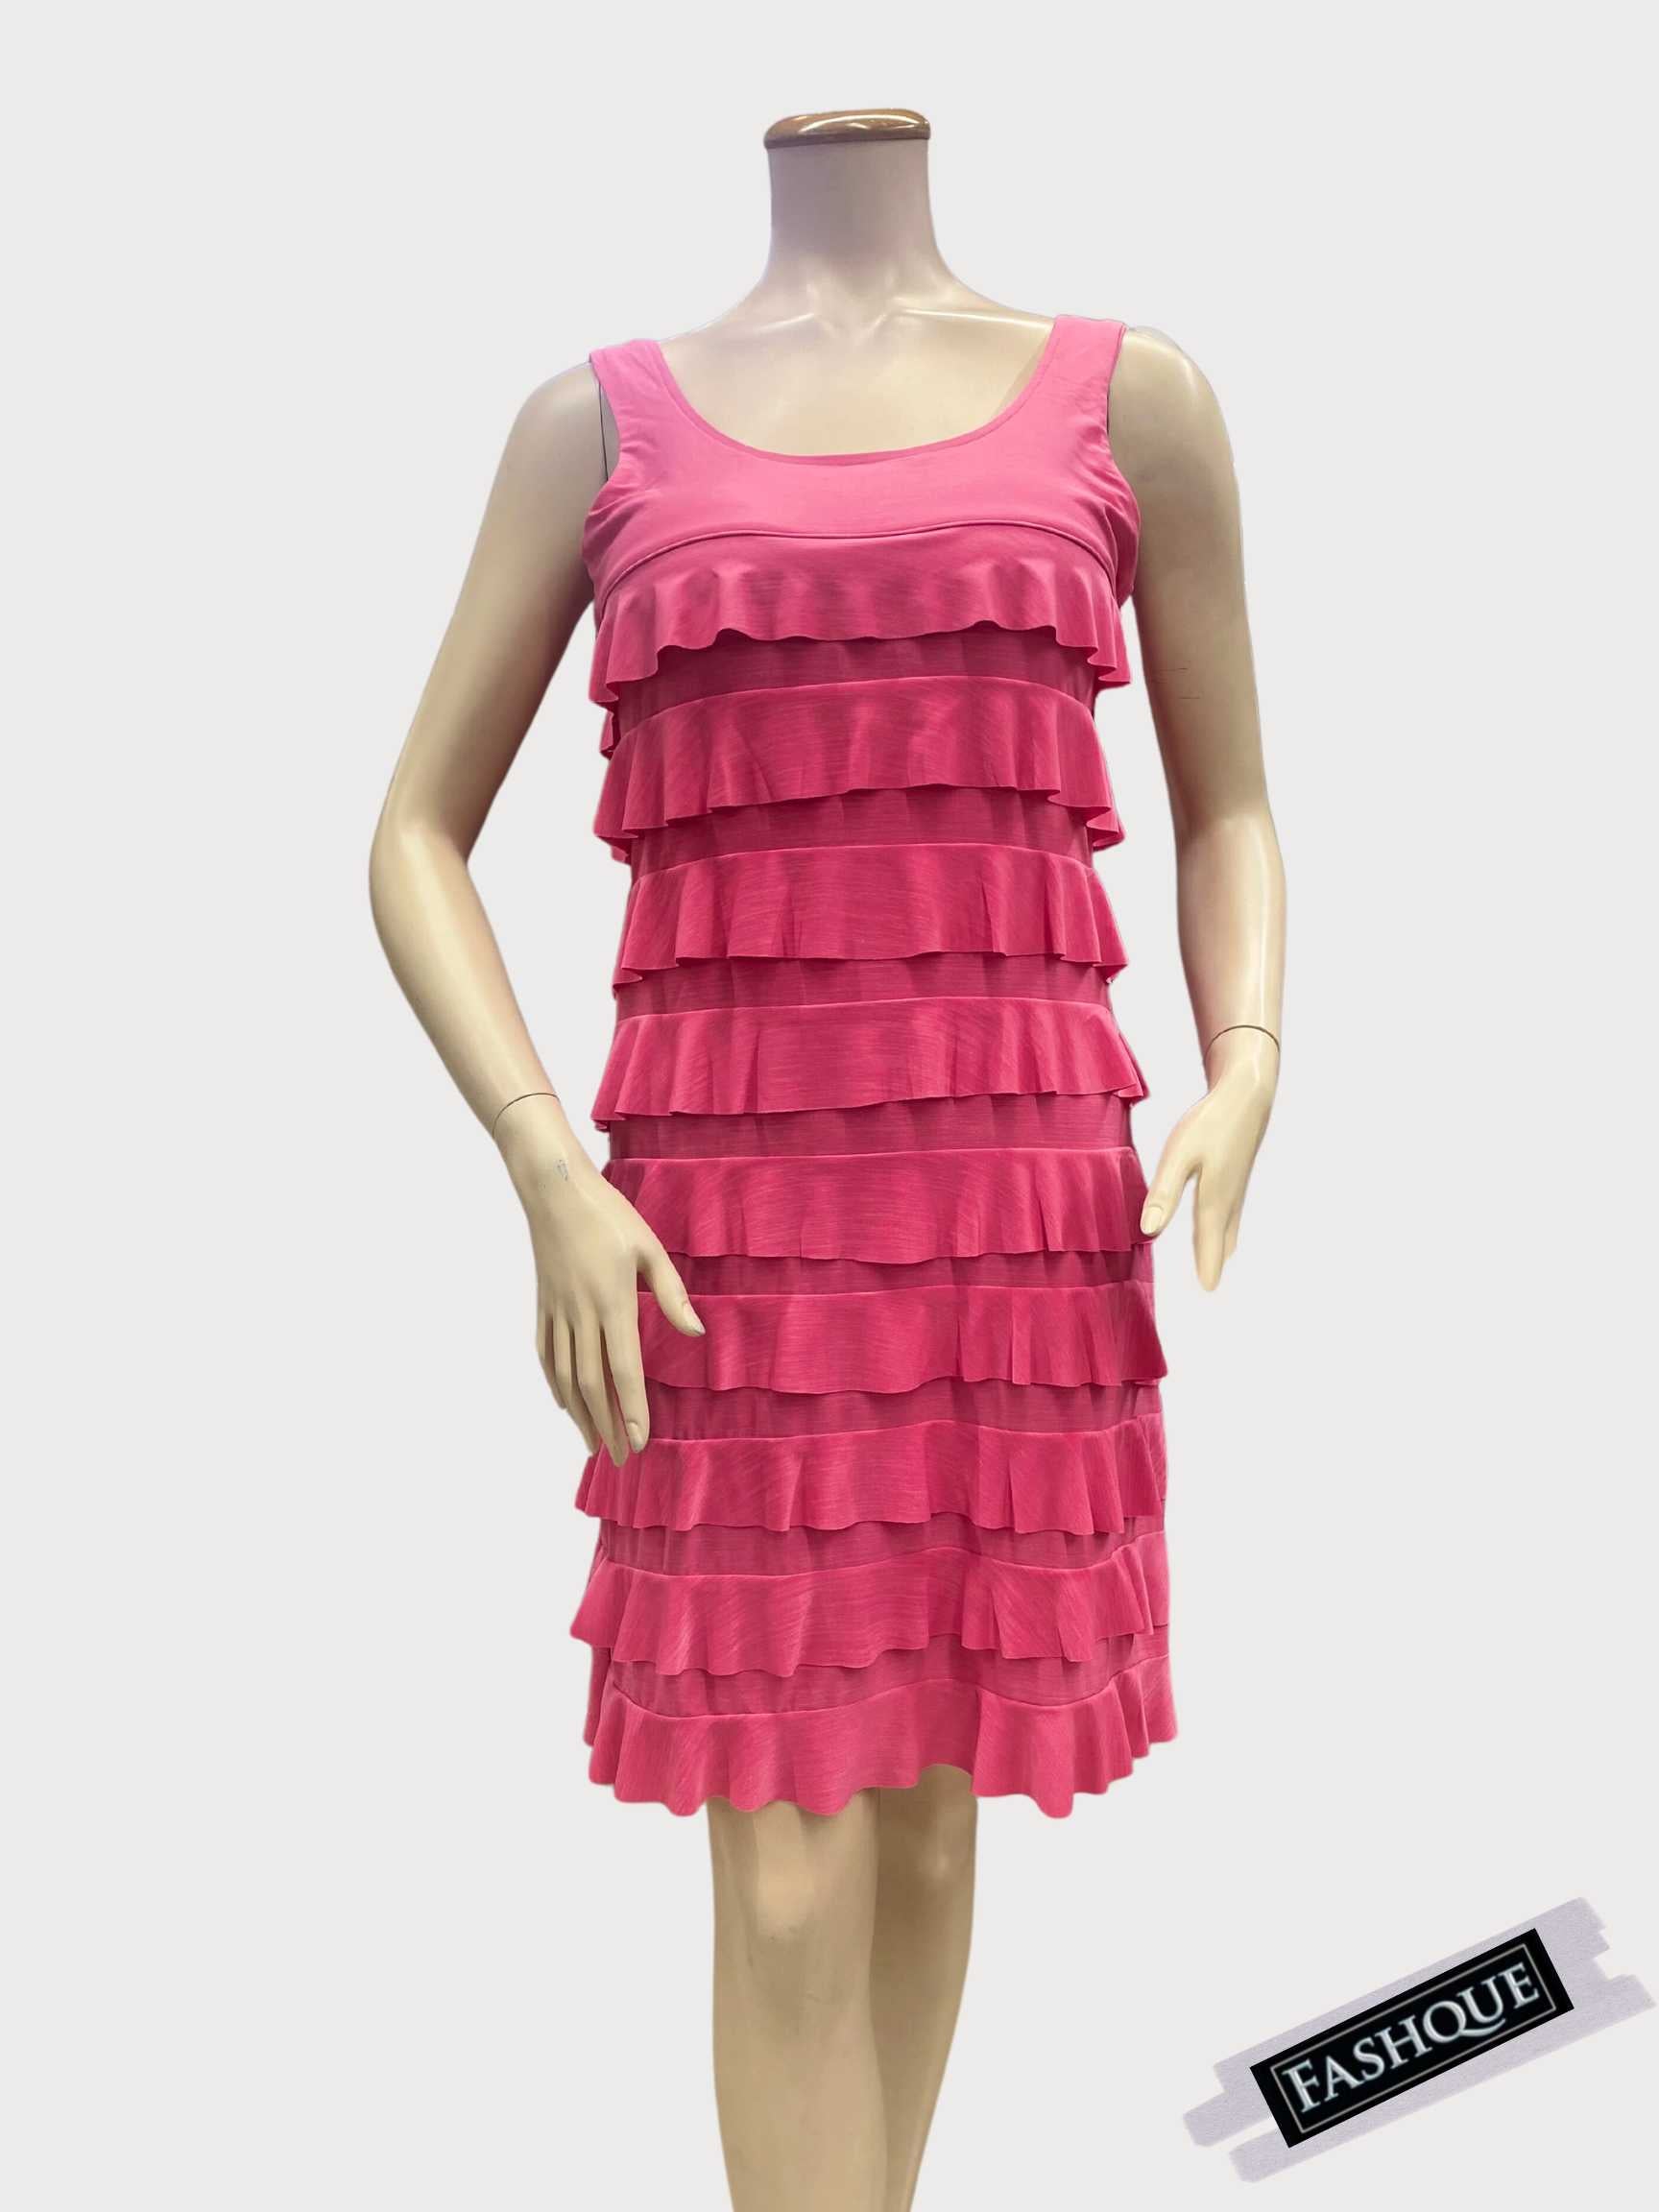 FASHQUE - CHACHA Ruffle Sleeveless Knee length Dress- SOLID COLOR - D760